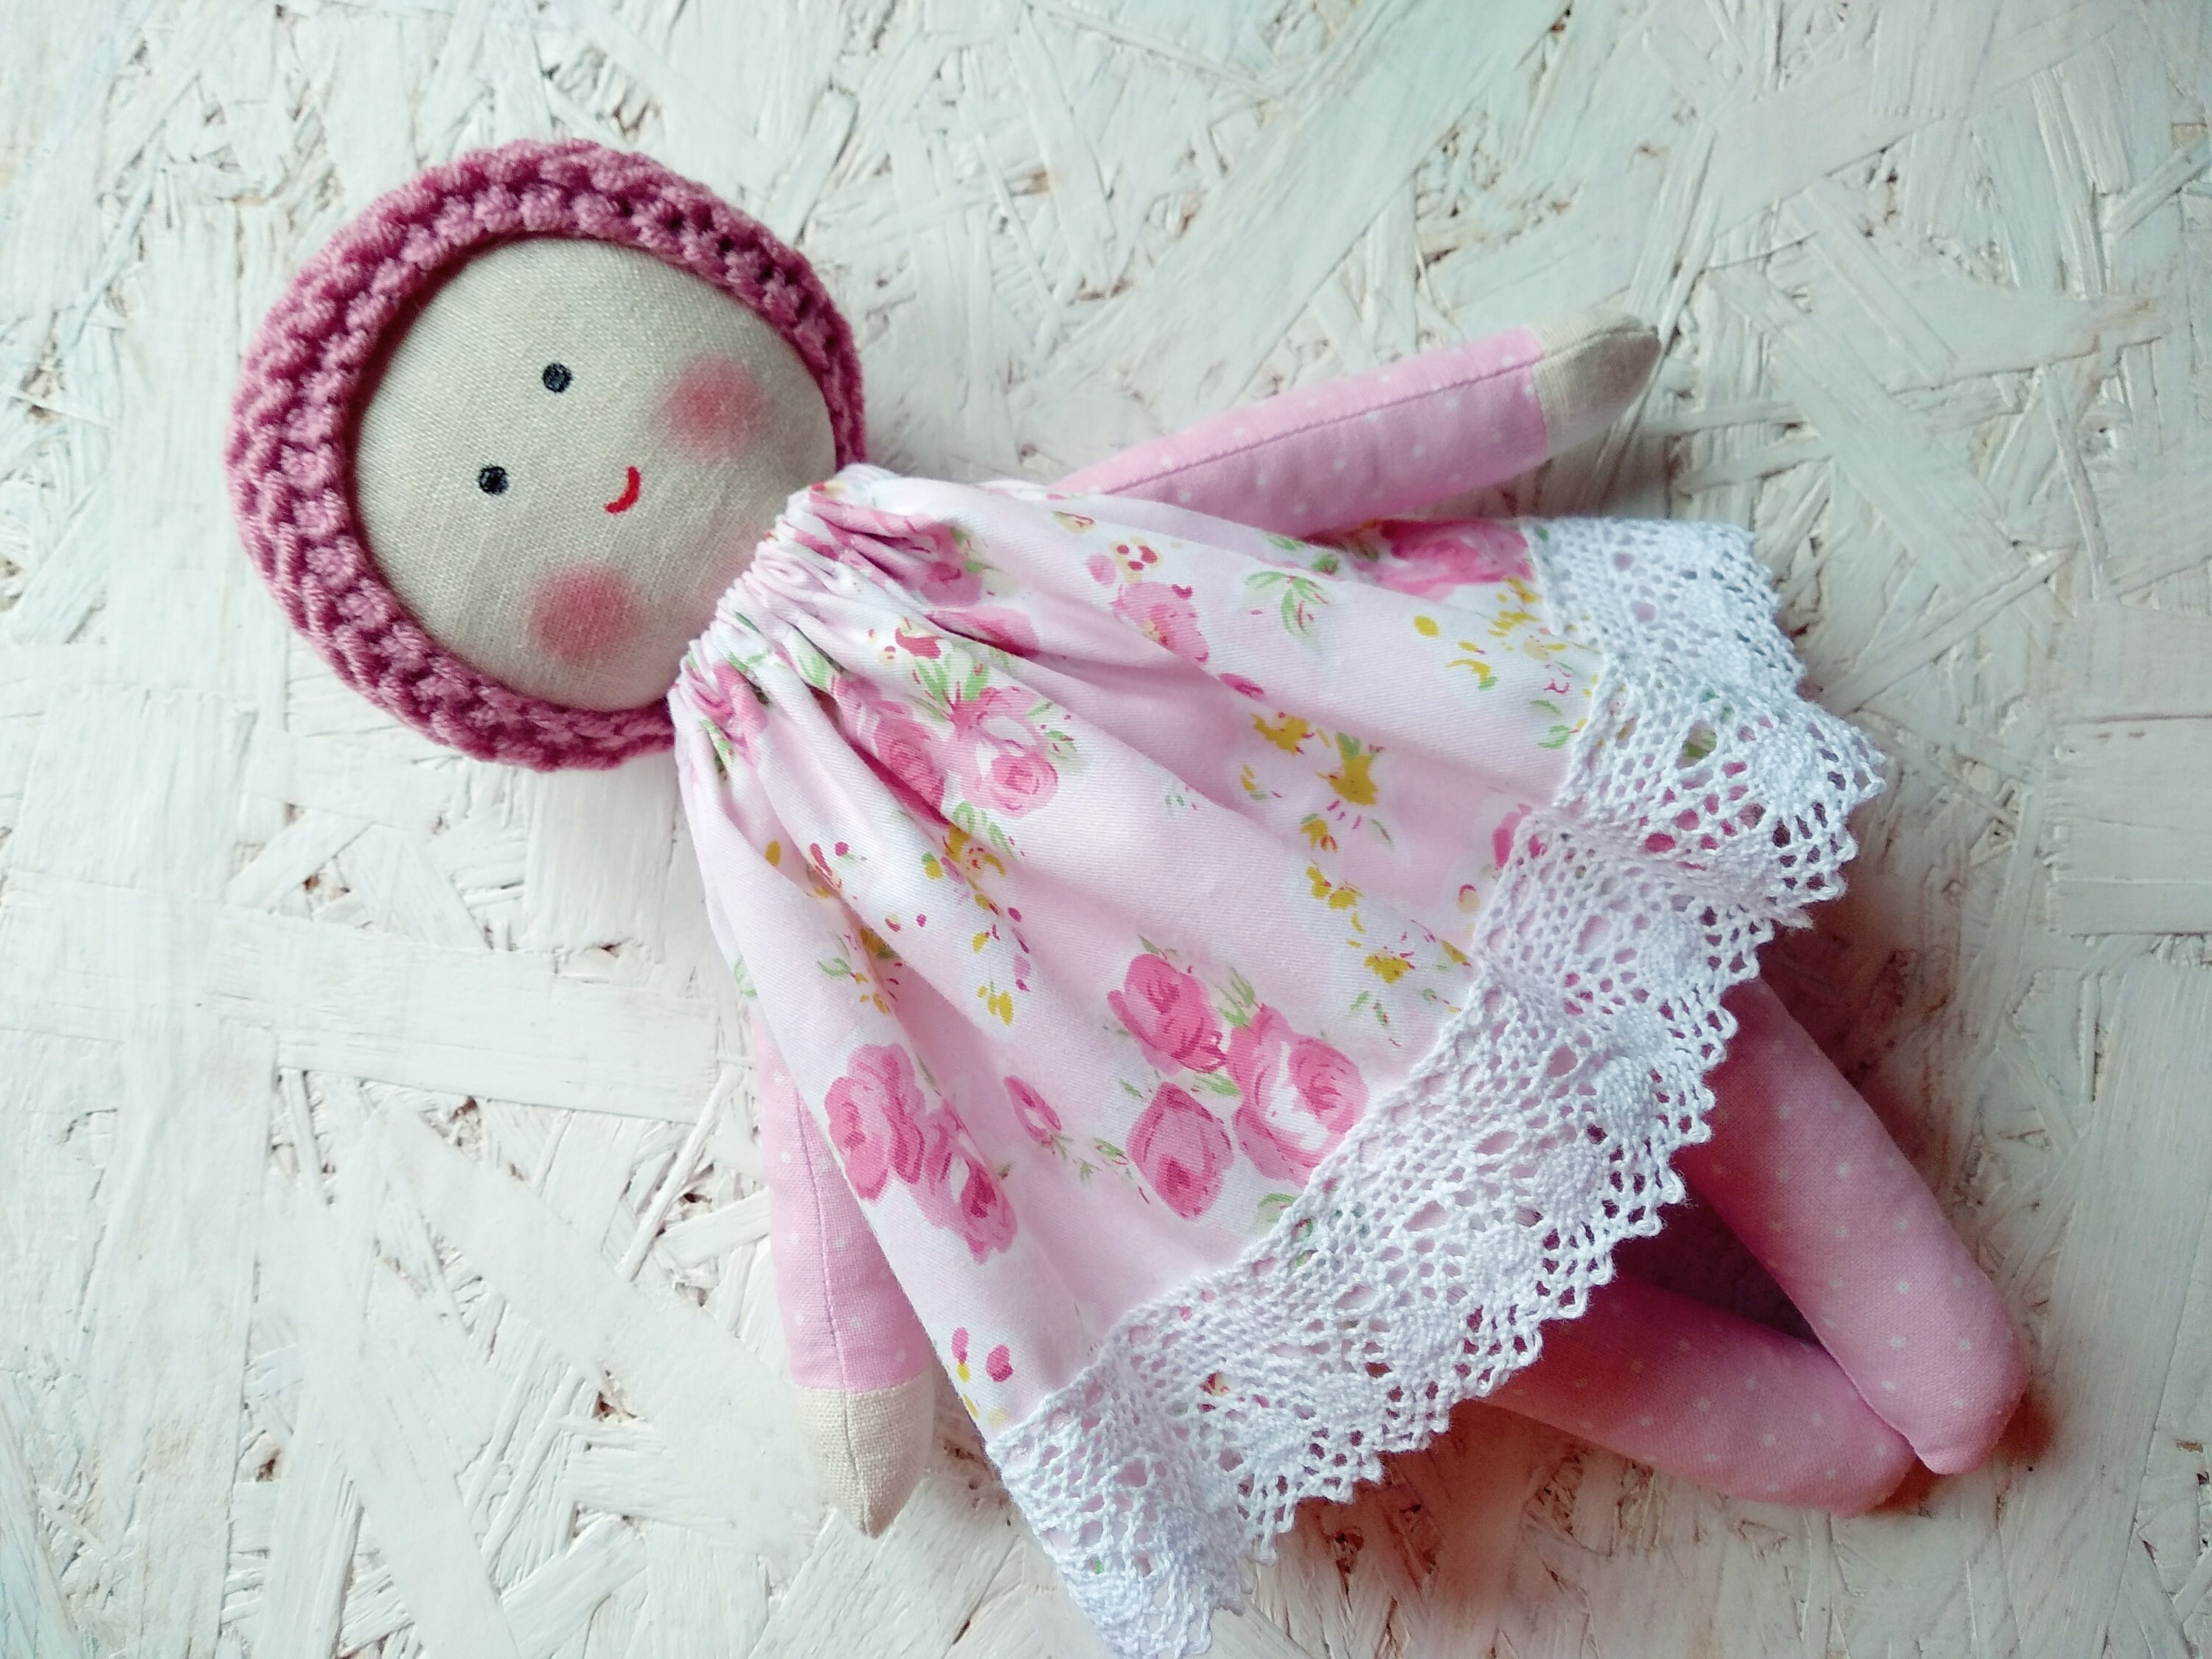 Baby's First Doll Organic soft toy Rag doll for baby | Etsy